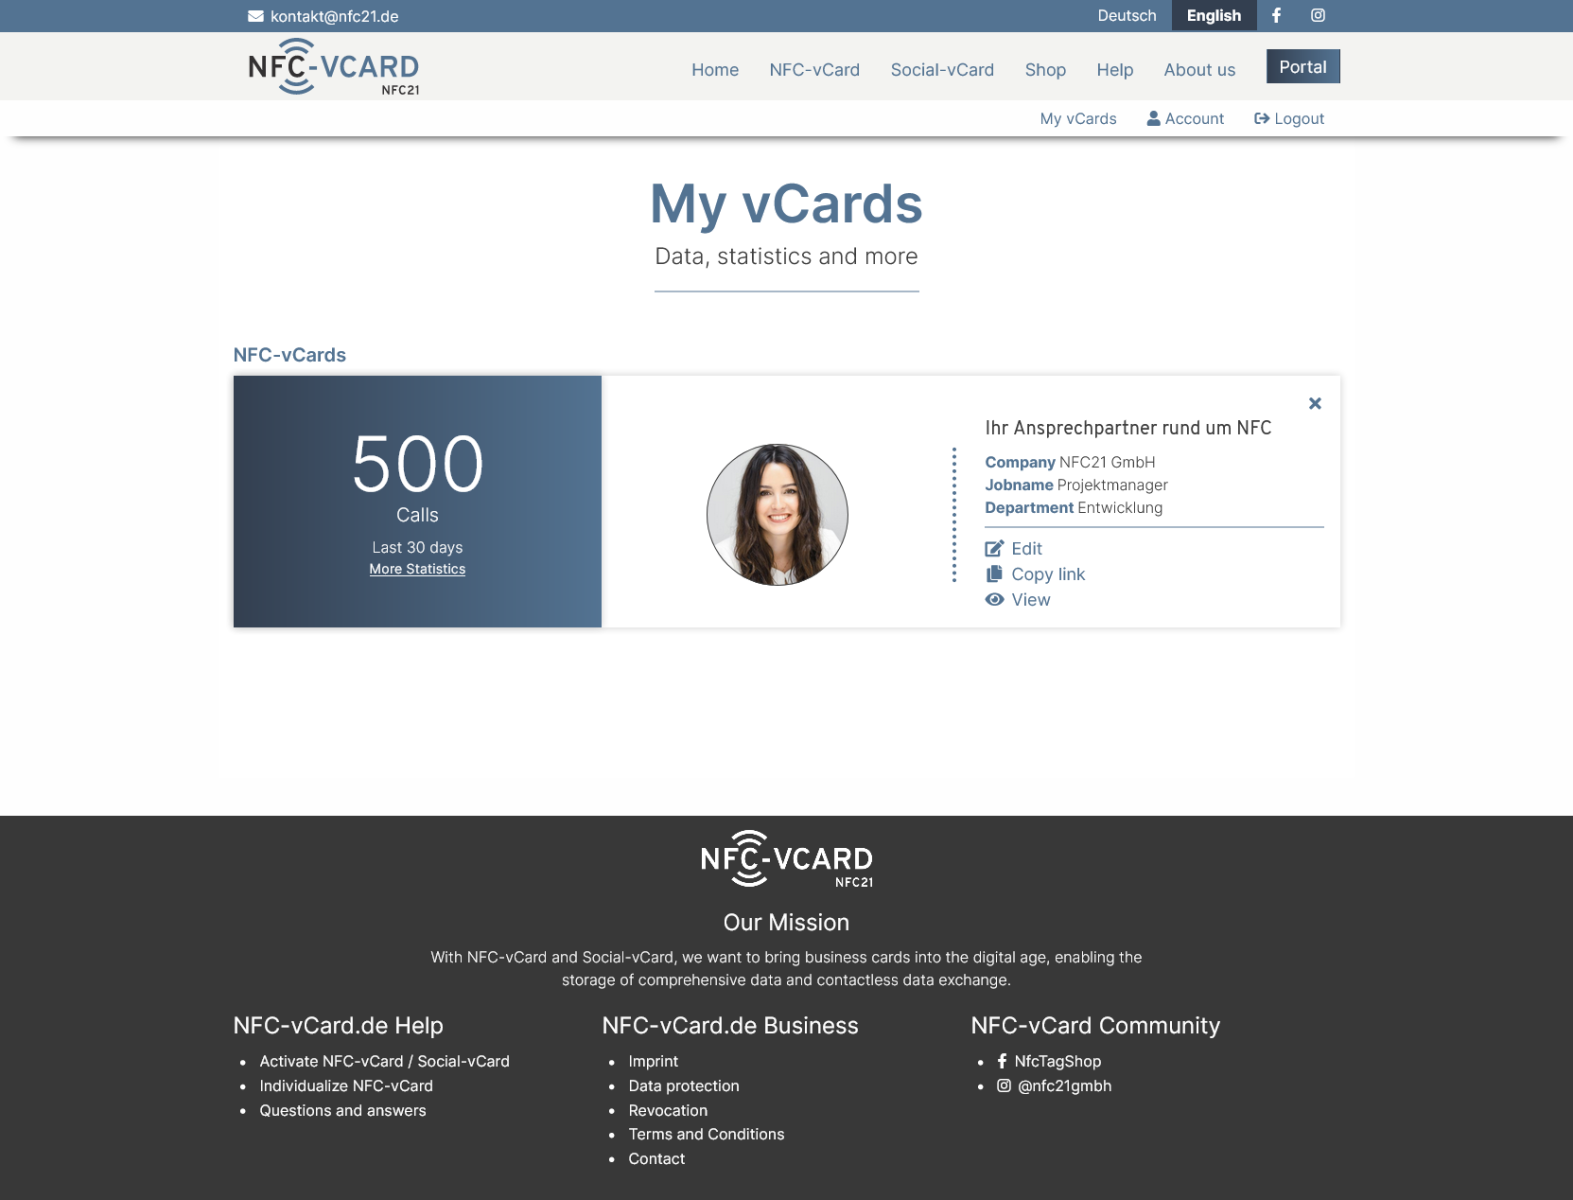 NFC-vCard - Everything at a glance